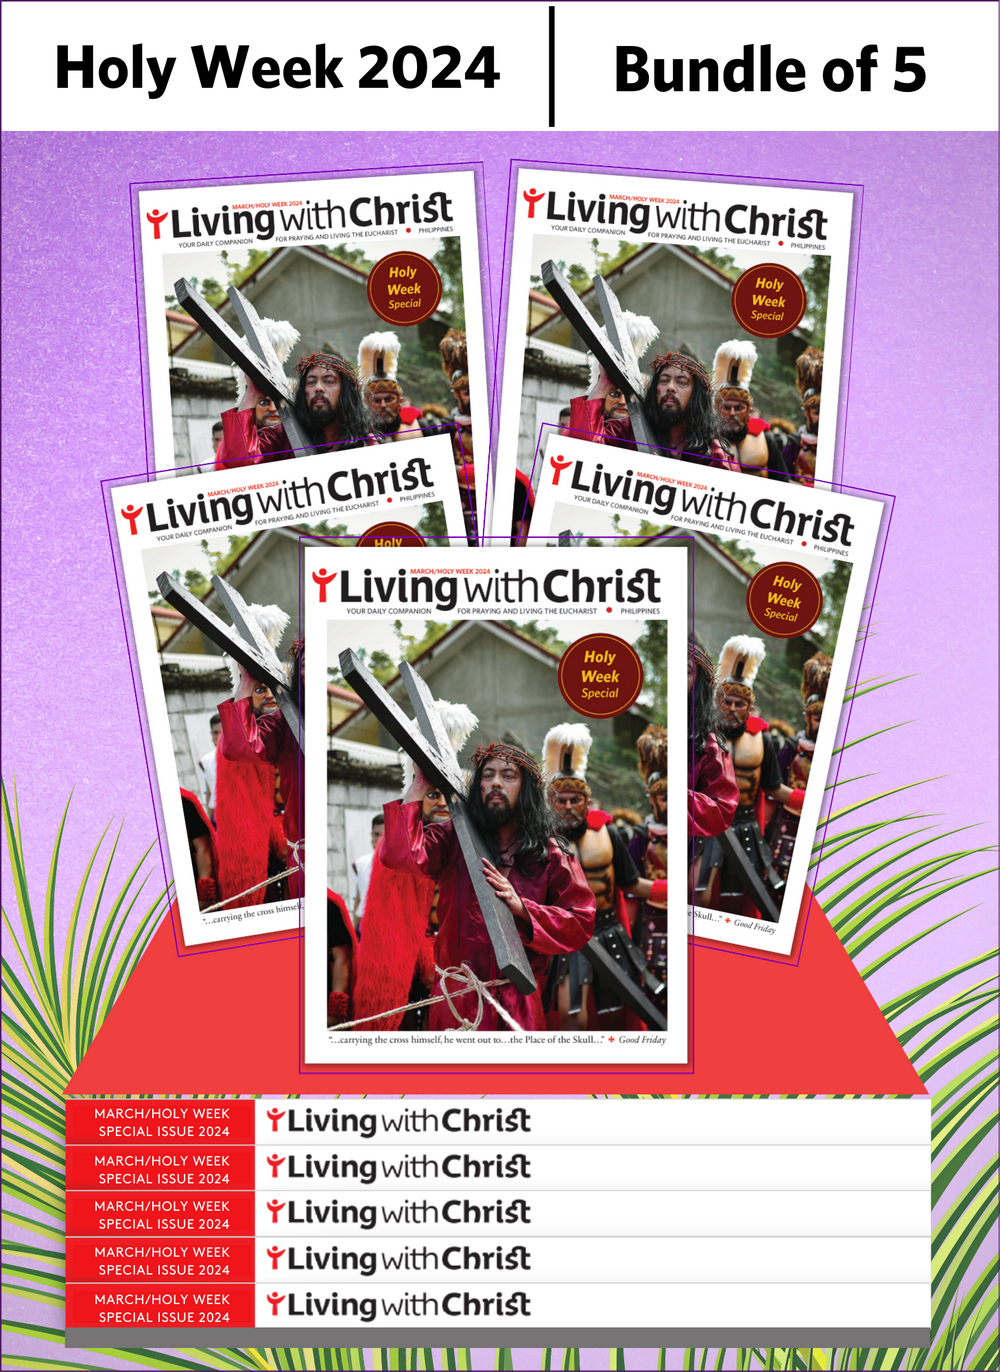 Living with Christ - SPECIAL MARCH/HOLY WEEK ISSUE 2024 (Bundle of 5)